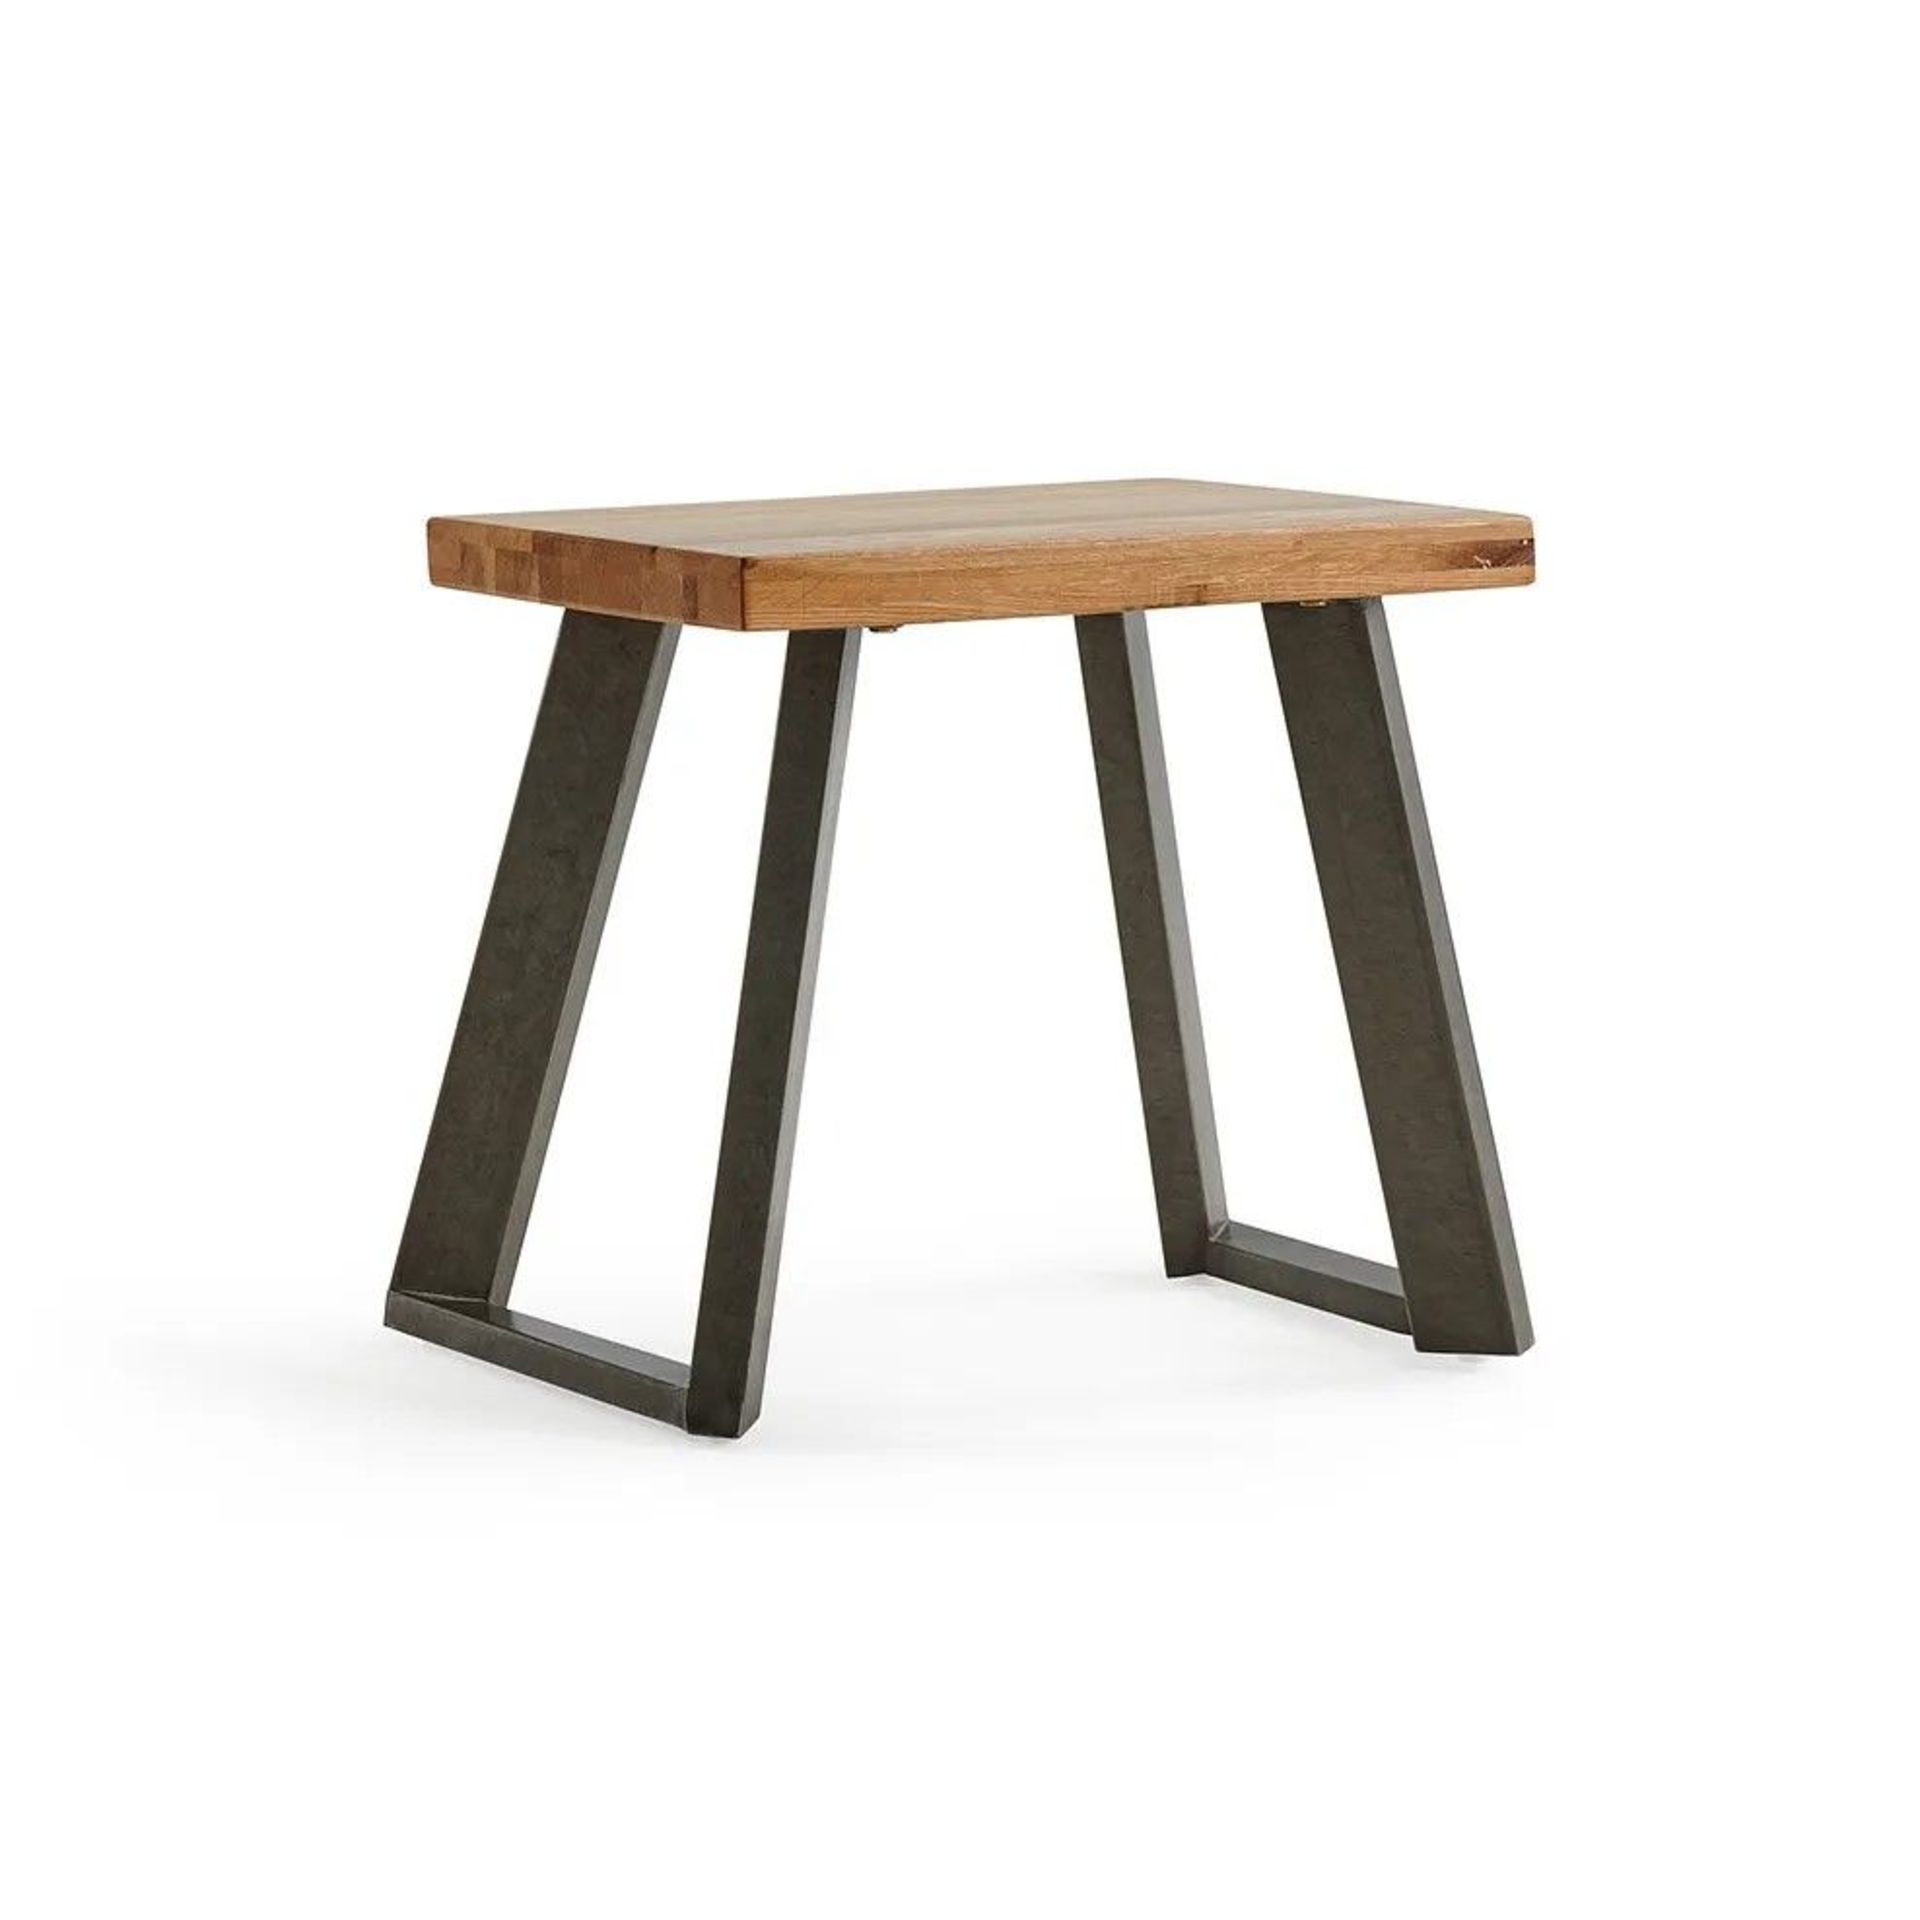 4 X NEW BOXED Cantelever Natural Solid Oak & Metal Stool. RRP £130 EACH, TOTAL RRP £520. For a - Image 2 of 2